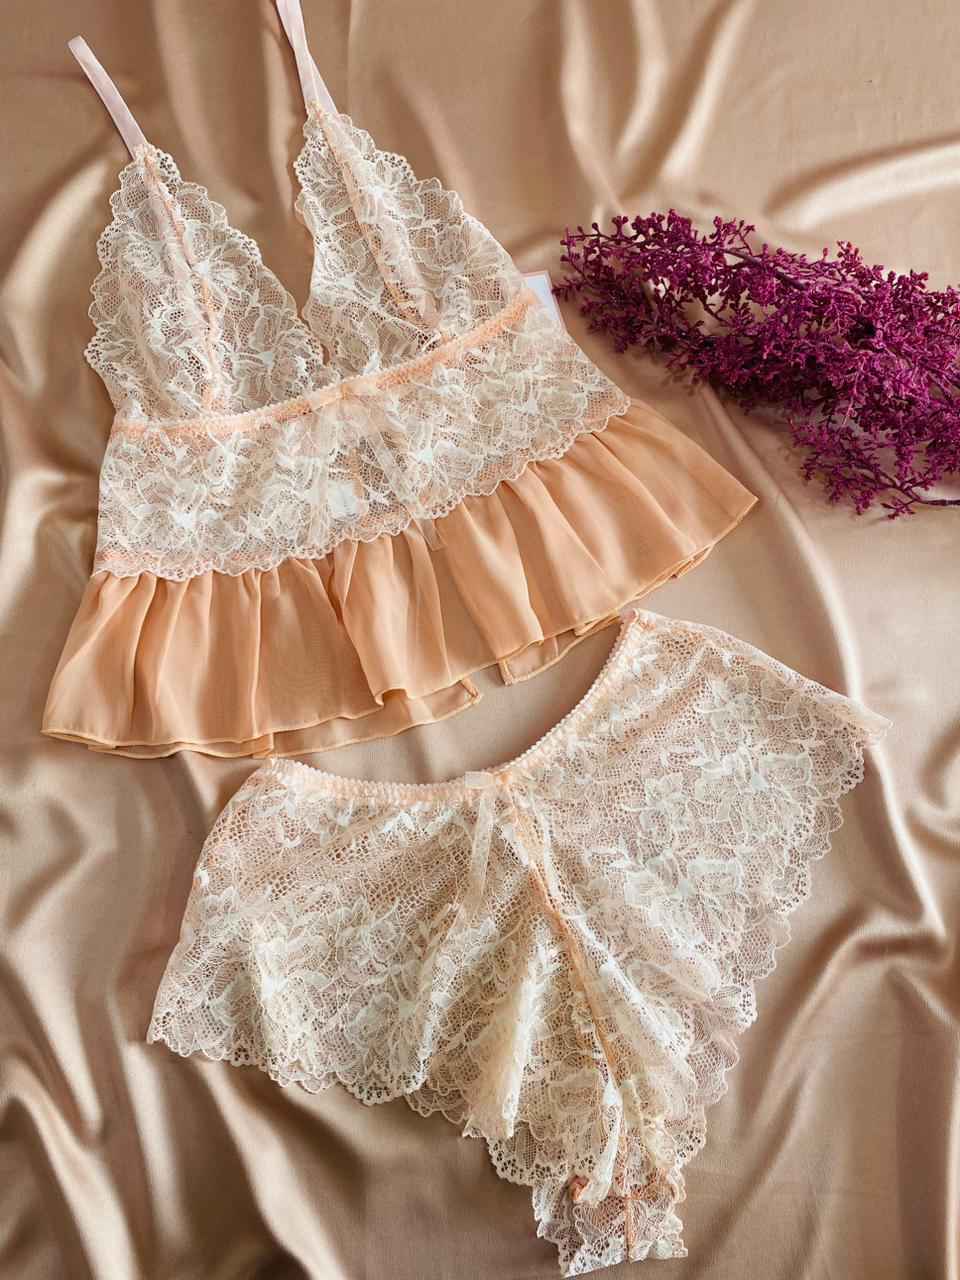 Yellow/white Sexy Bralette Set Women 2021 Floral Lace Lingerie Set Blossom  Bra Top And Thong Female Bedtime Lenceria Underwear - Bra & Brief Sets -  AliExpress